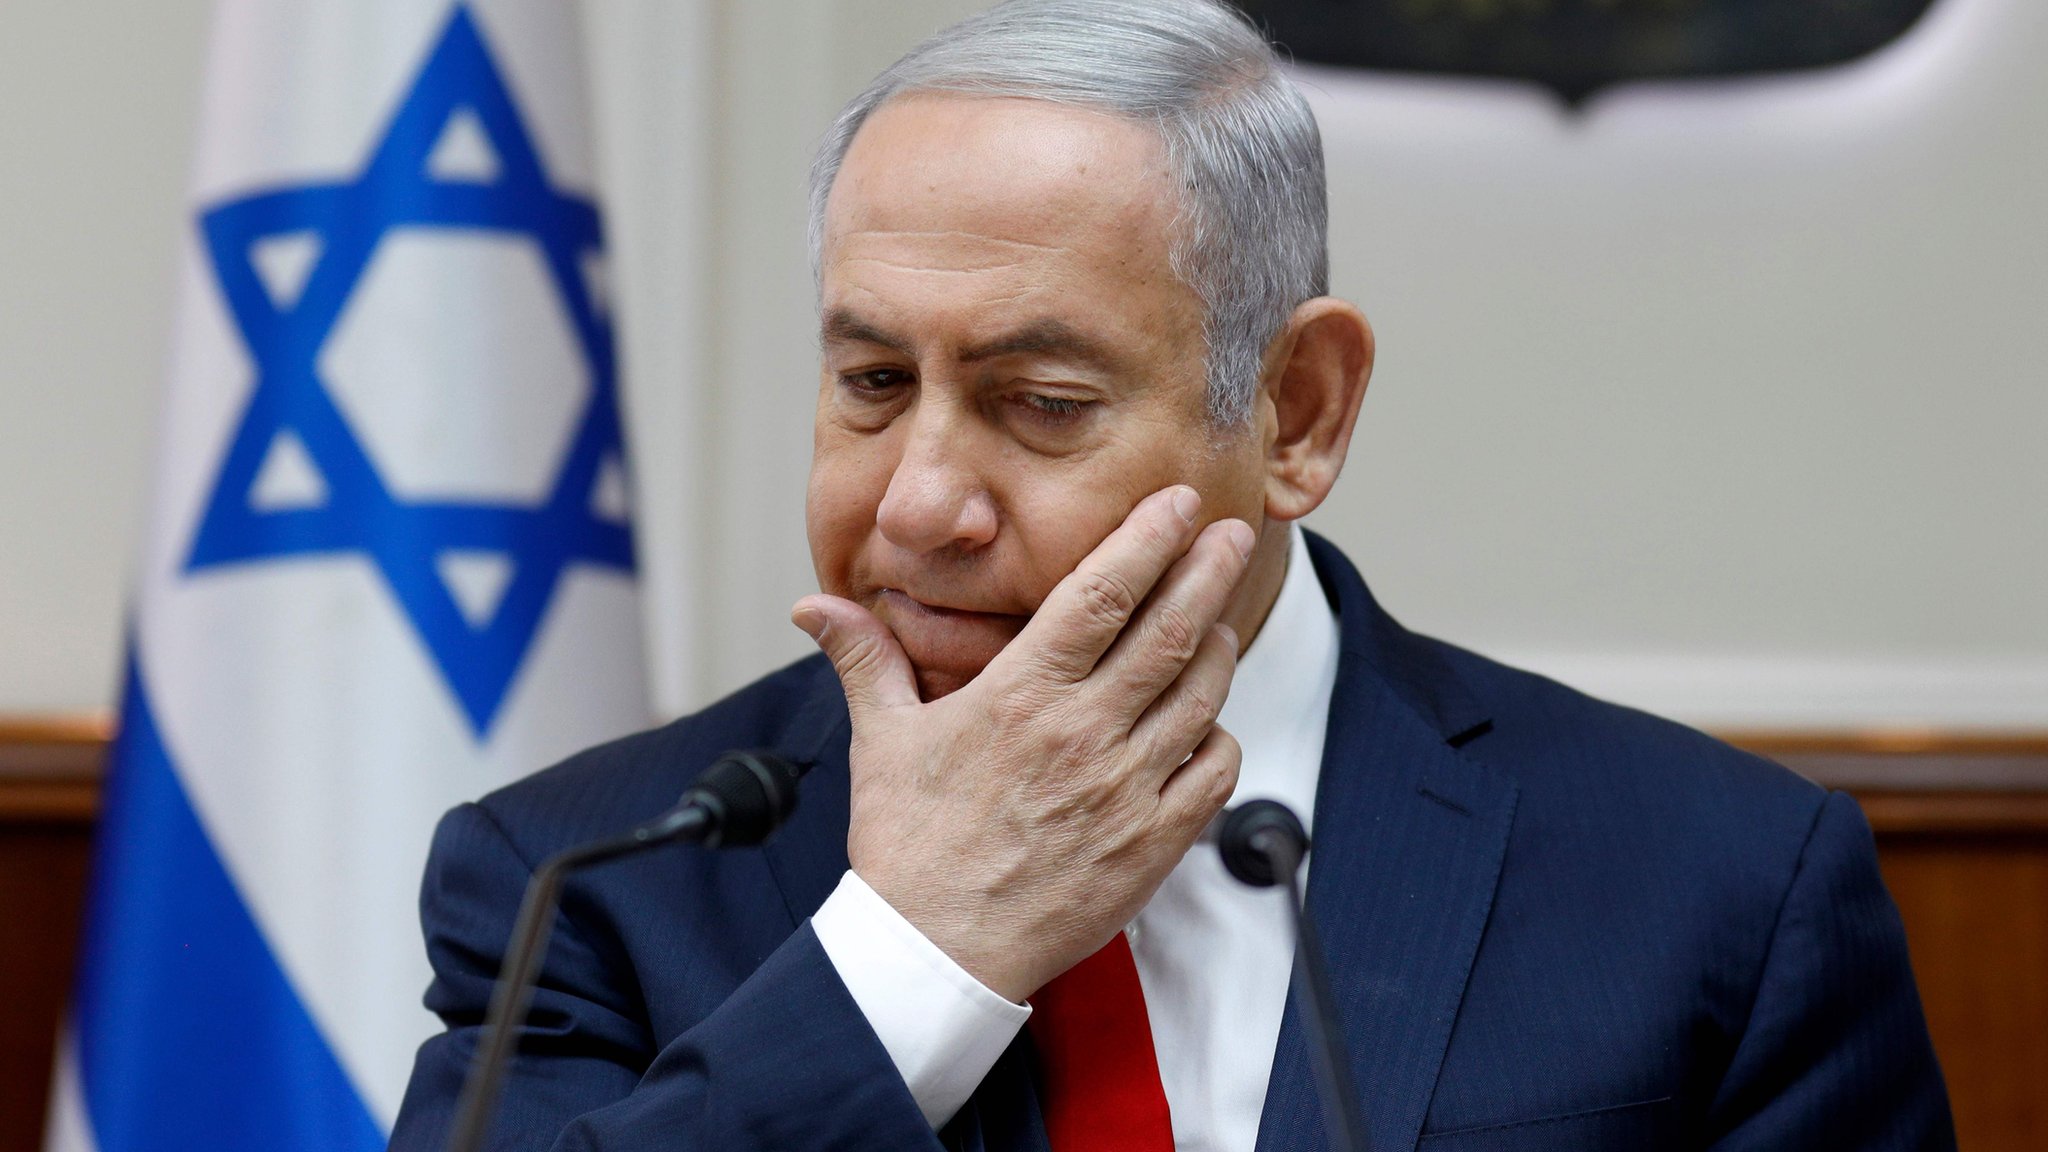 Benjamin Netanyahu: What are the corruption charges?